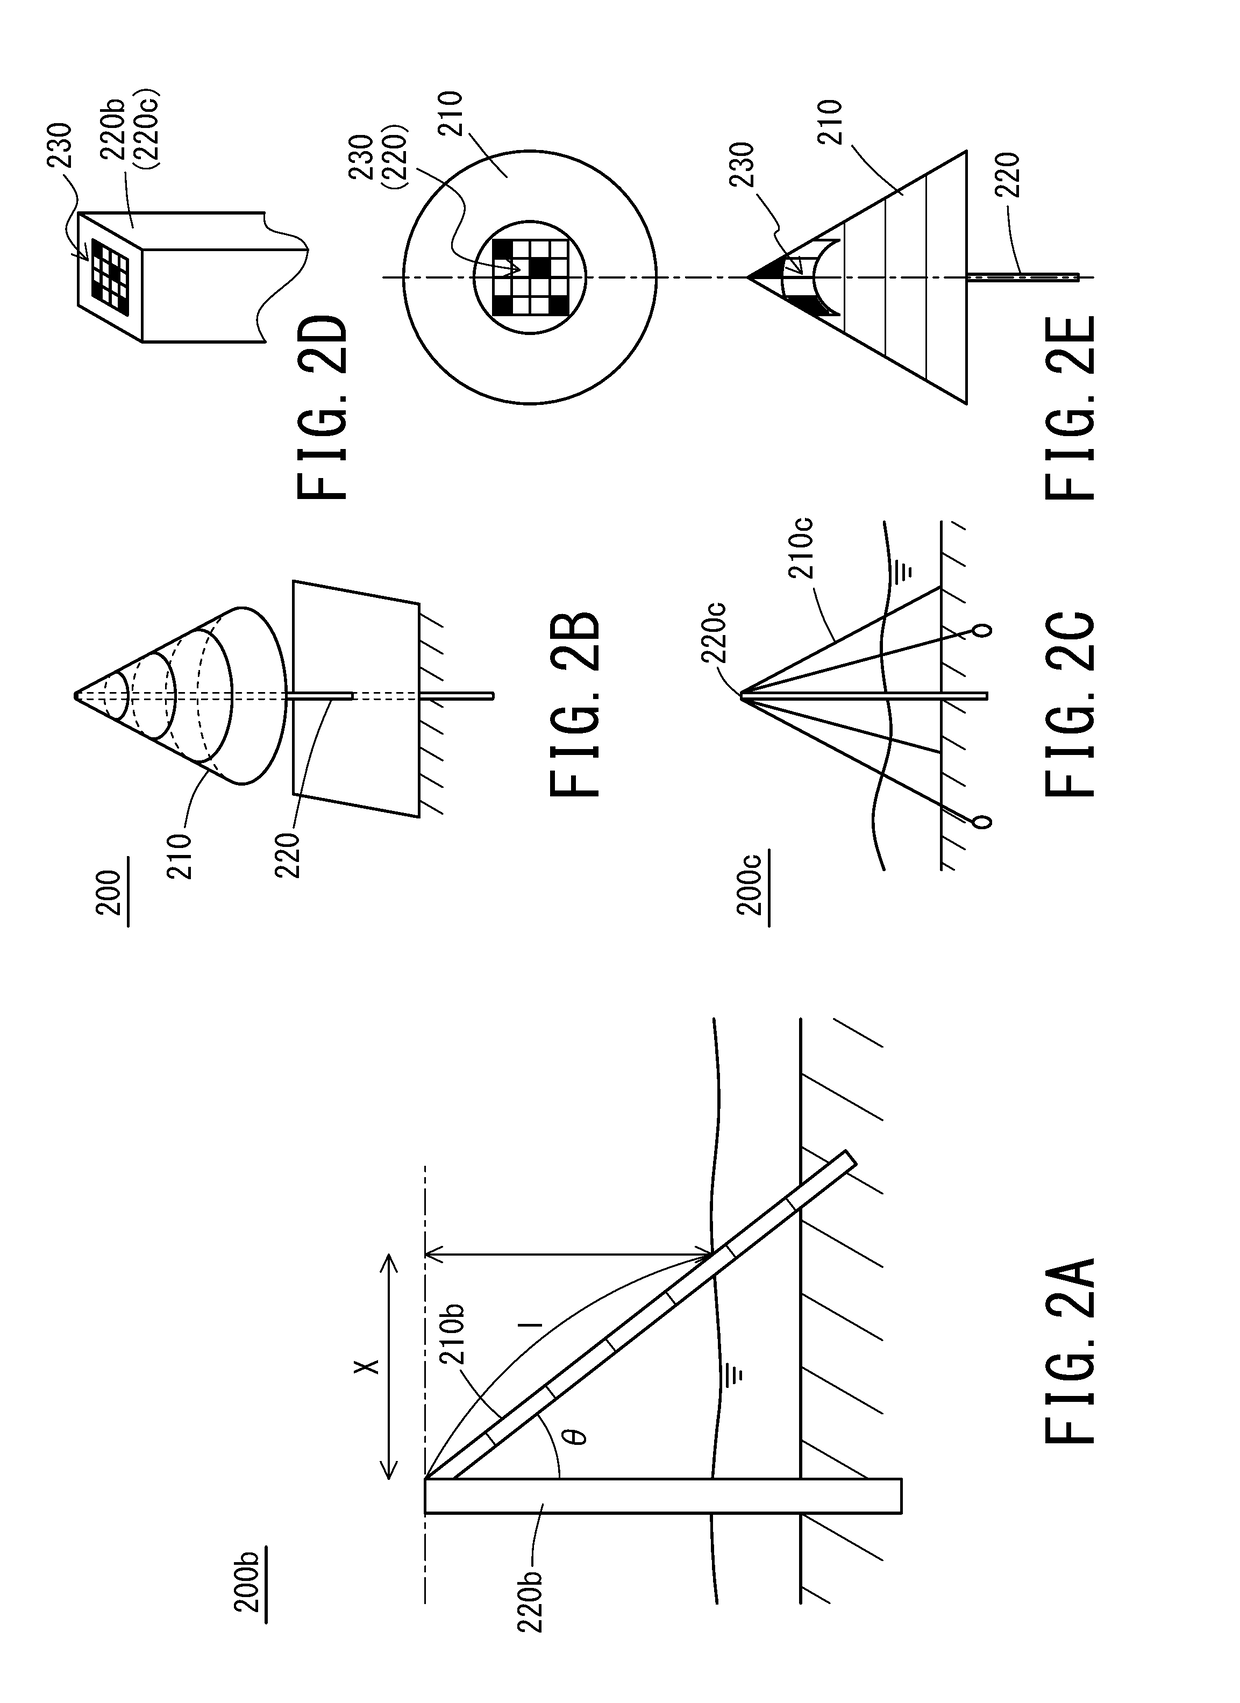 Water level measurement system and water level control system, and water level measurement method and water level control method using such systems